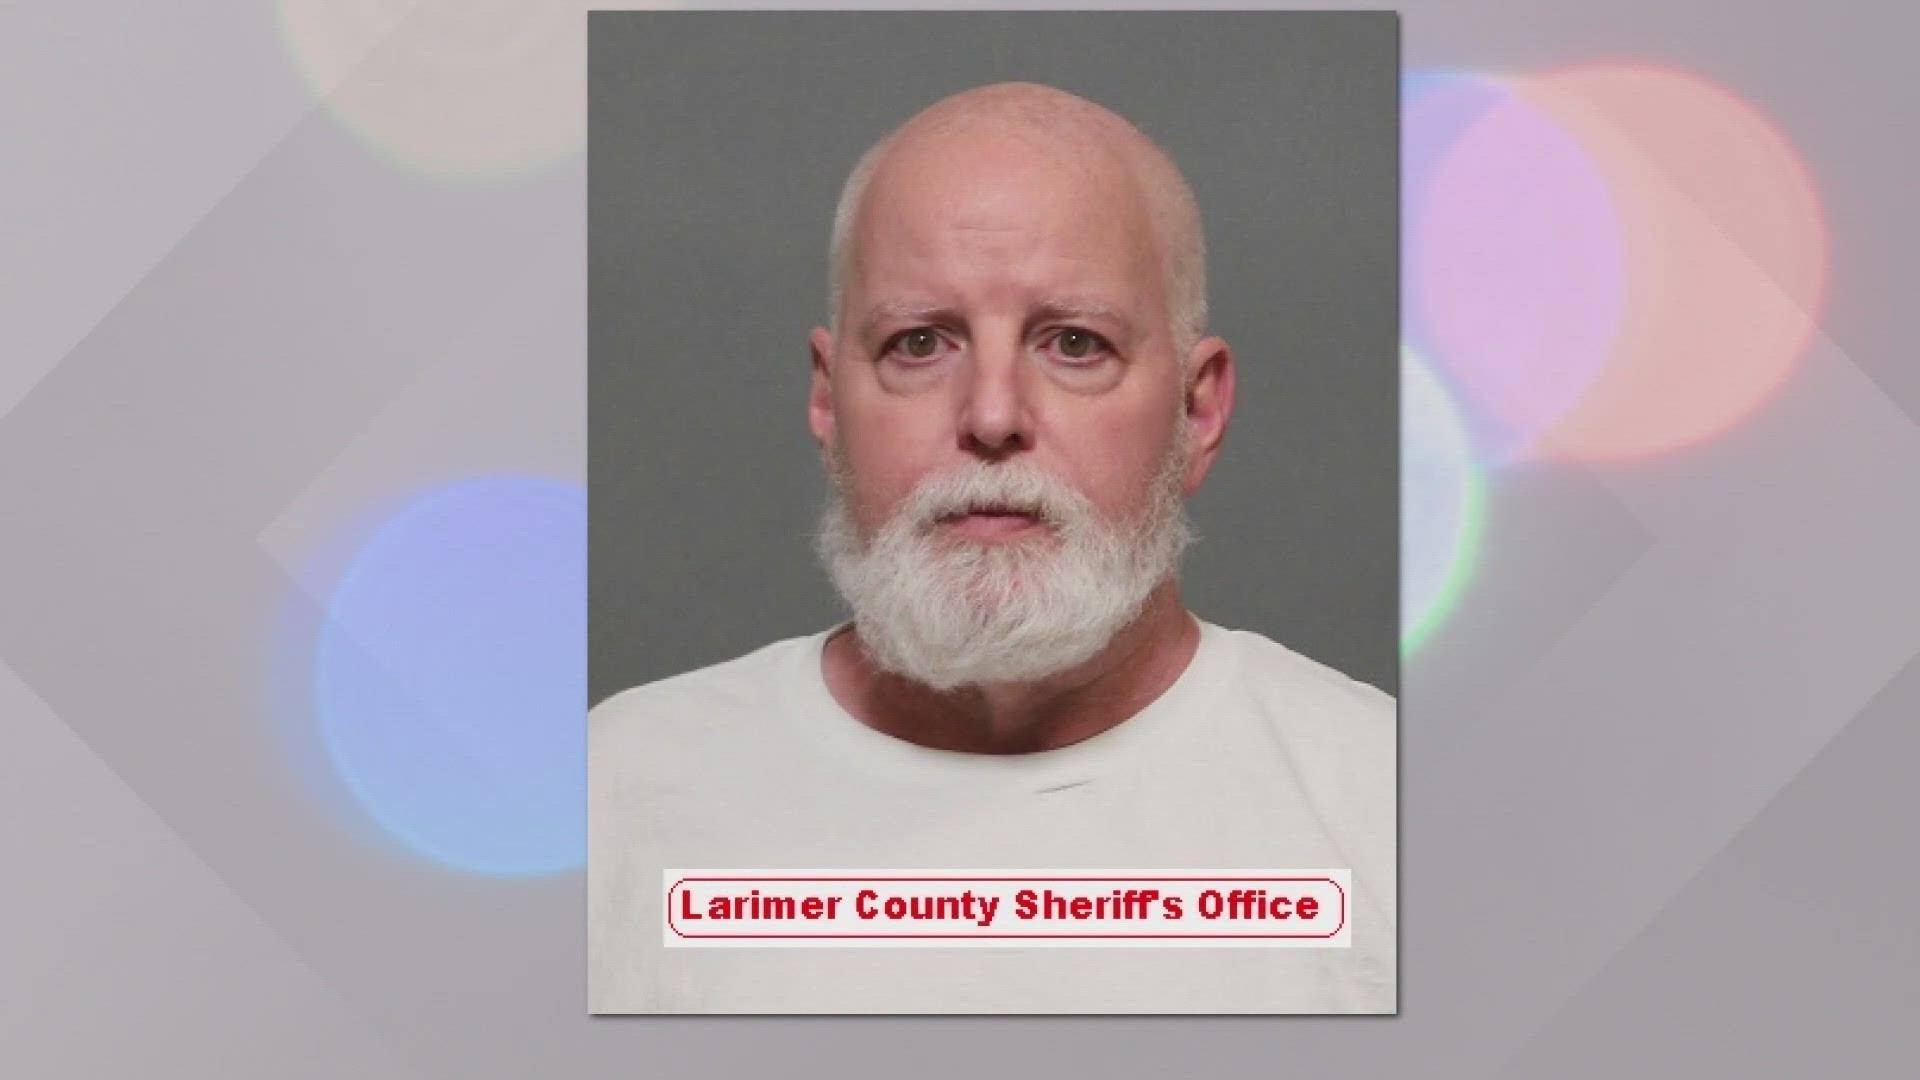 Robert Denise also faces a charge of failure to report child abuse, according to the Larimer County Sheriff's Office.